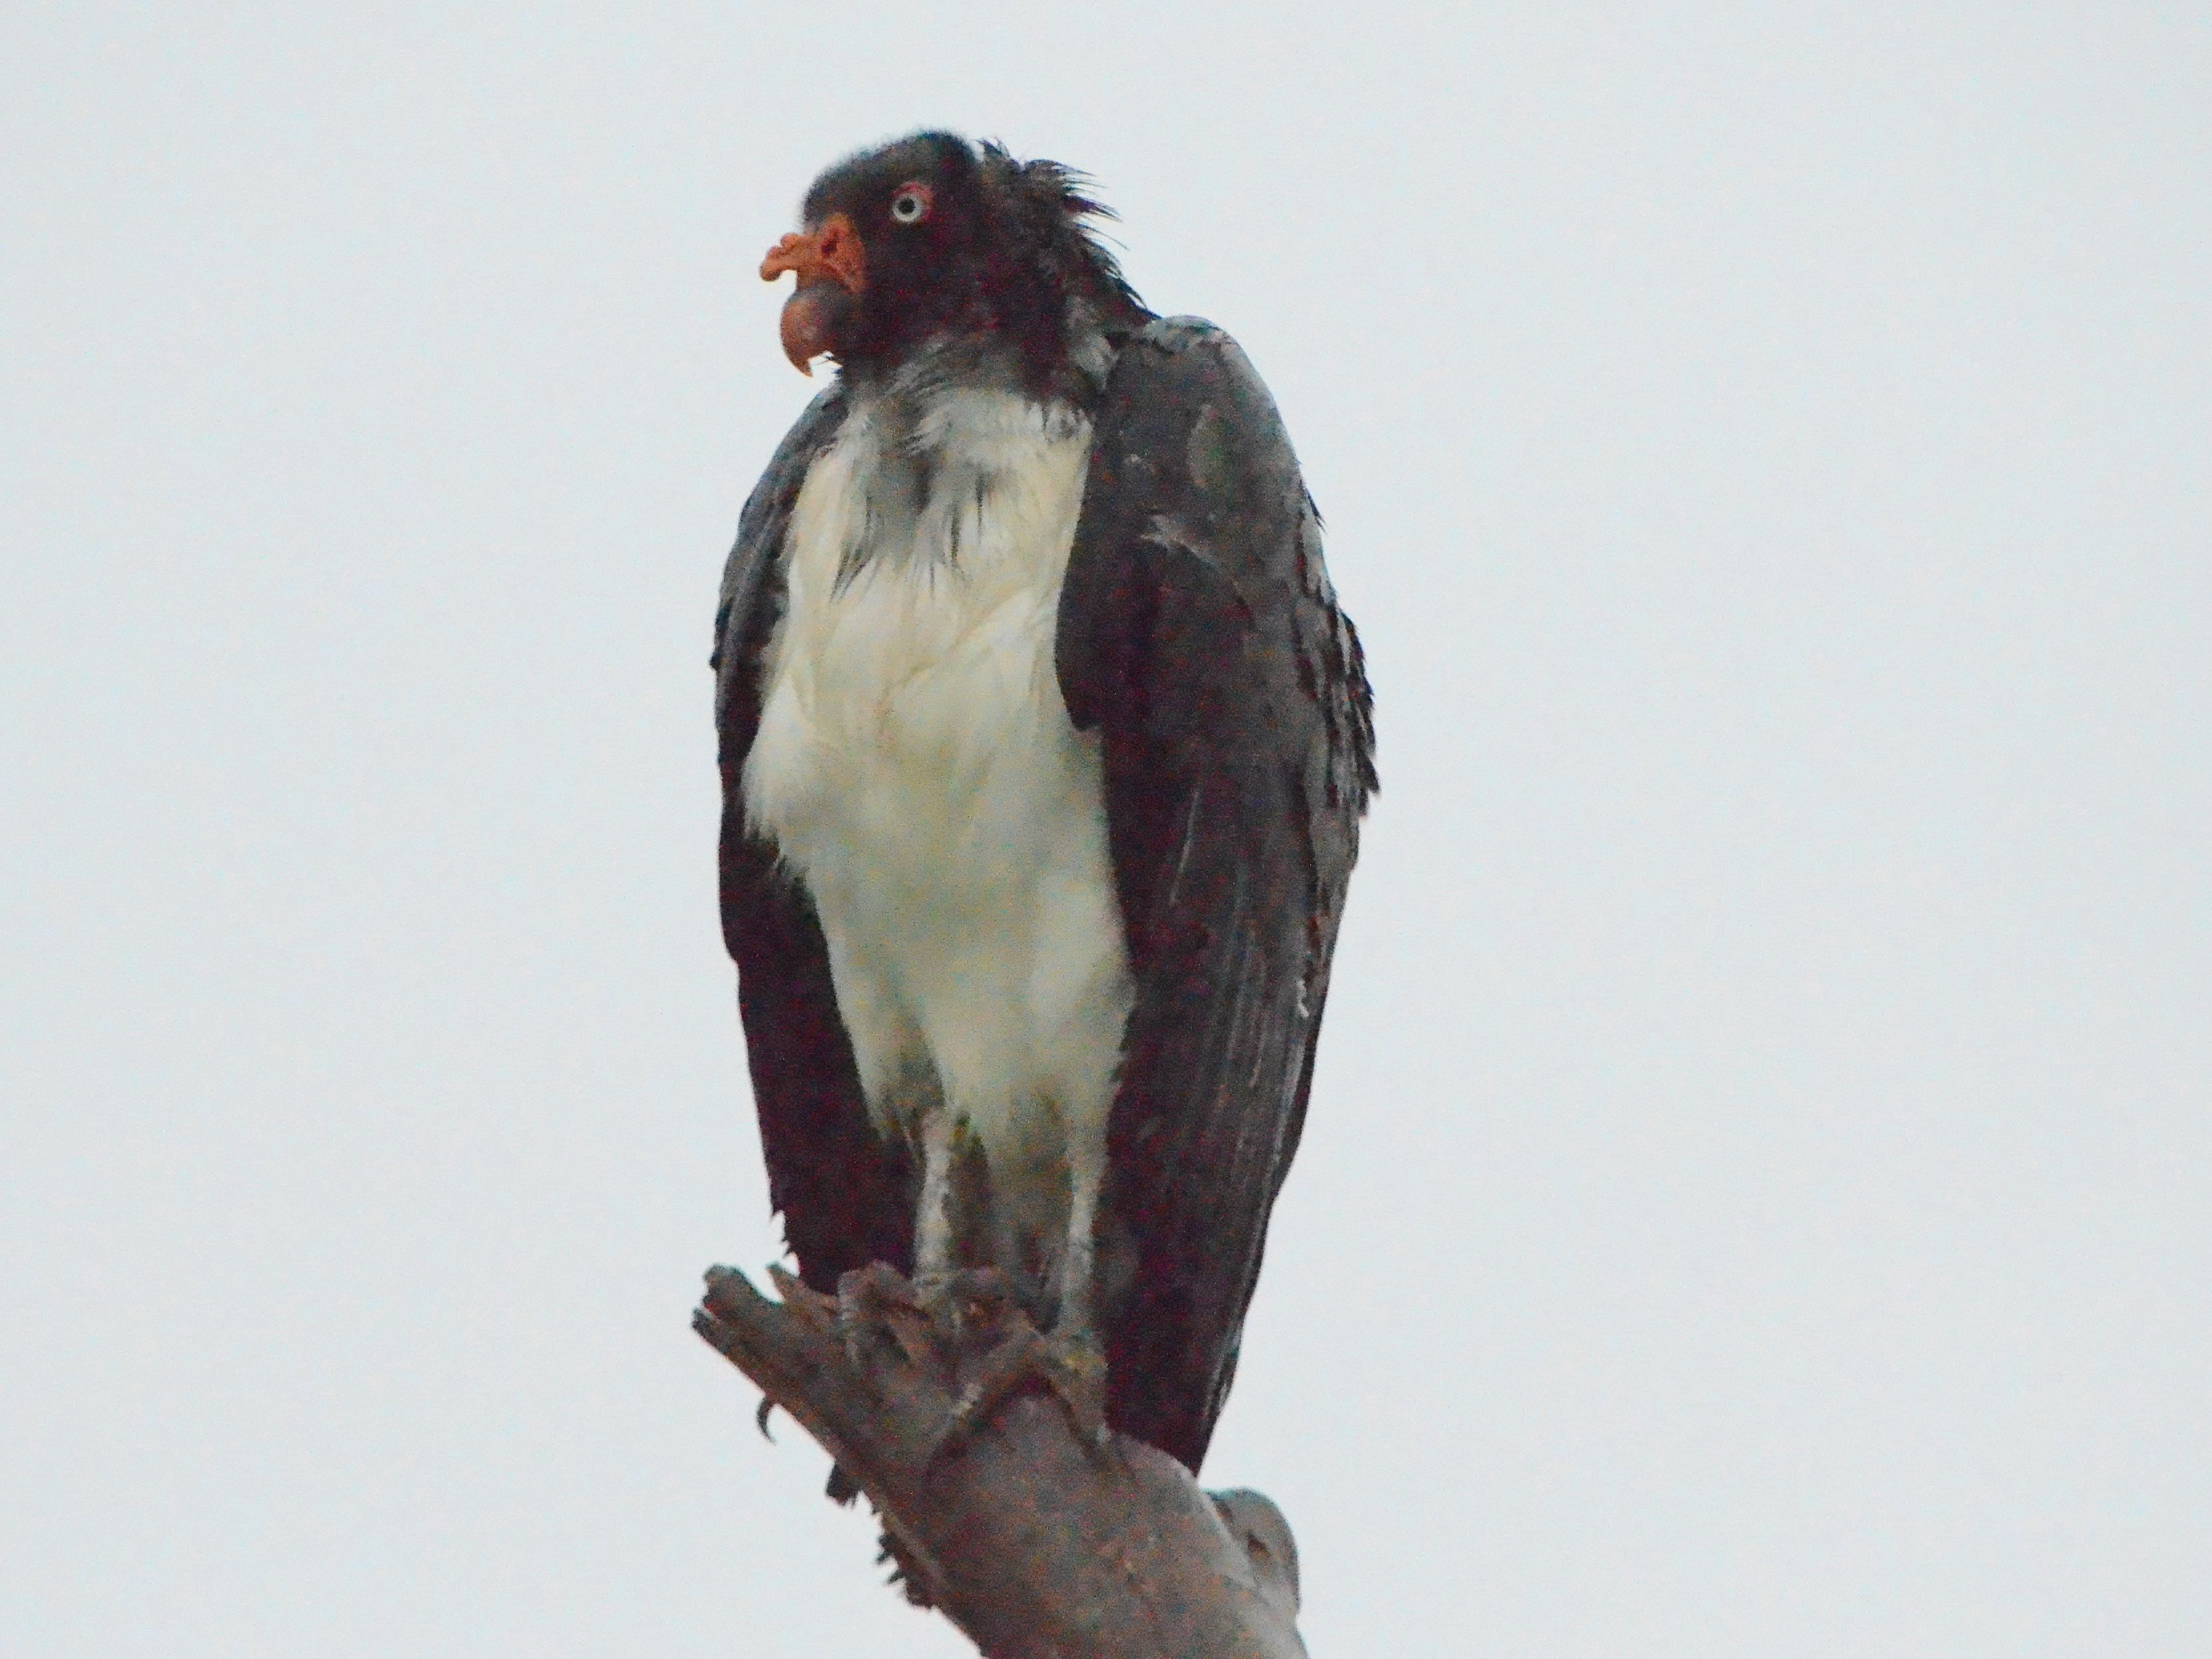 Click picture to see more King Vultures.